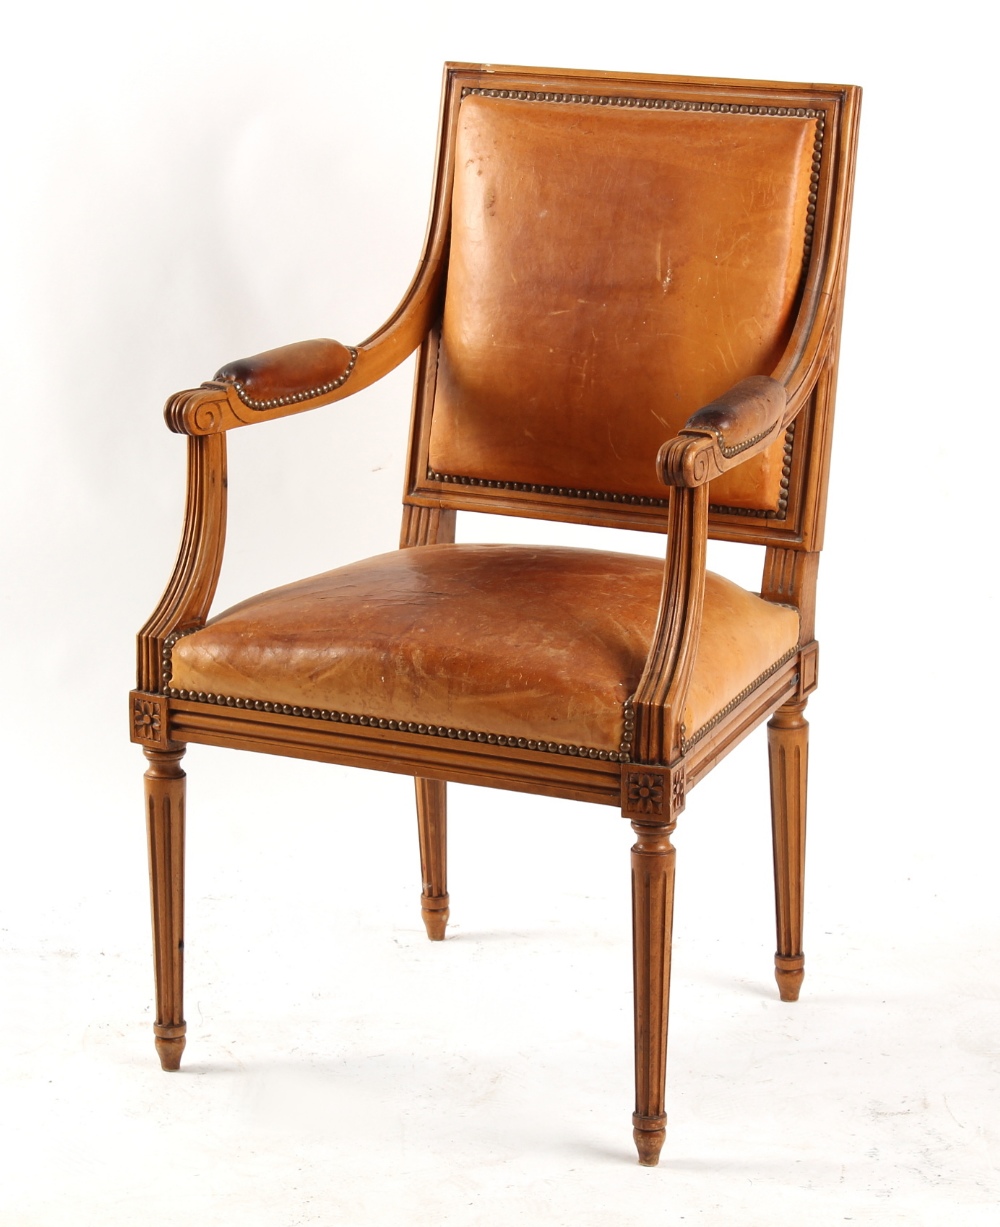 Property of a deceased estate - a Louis XVI style tan leather upholstered open armchair.